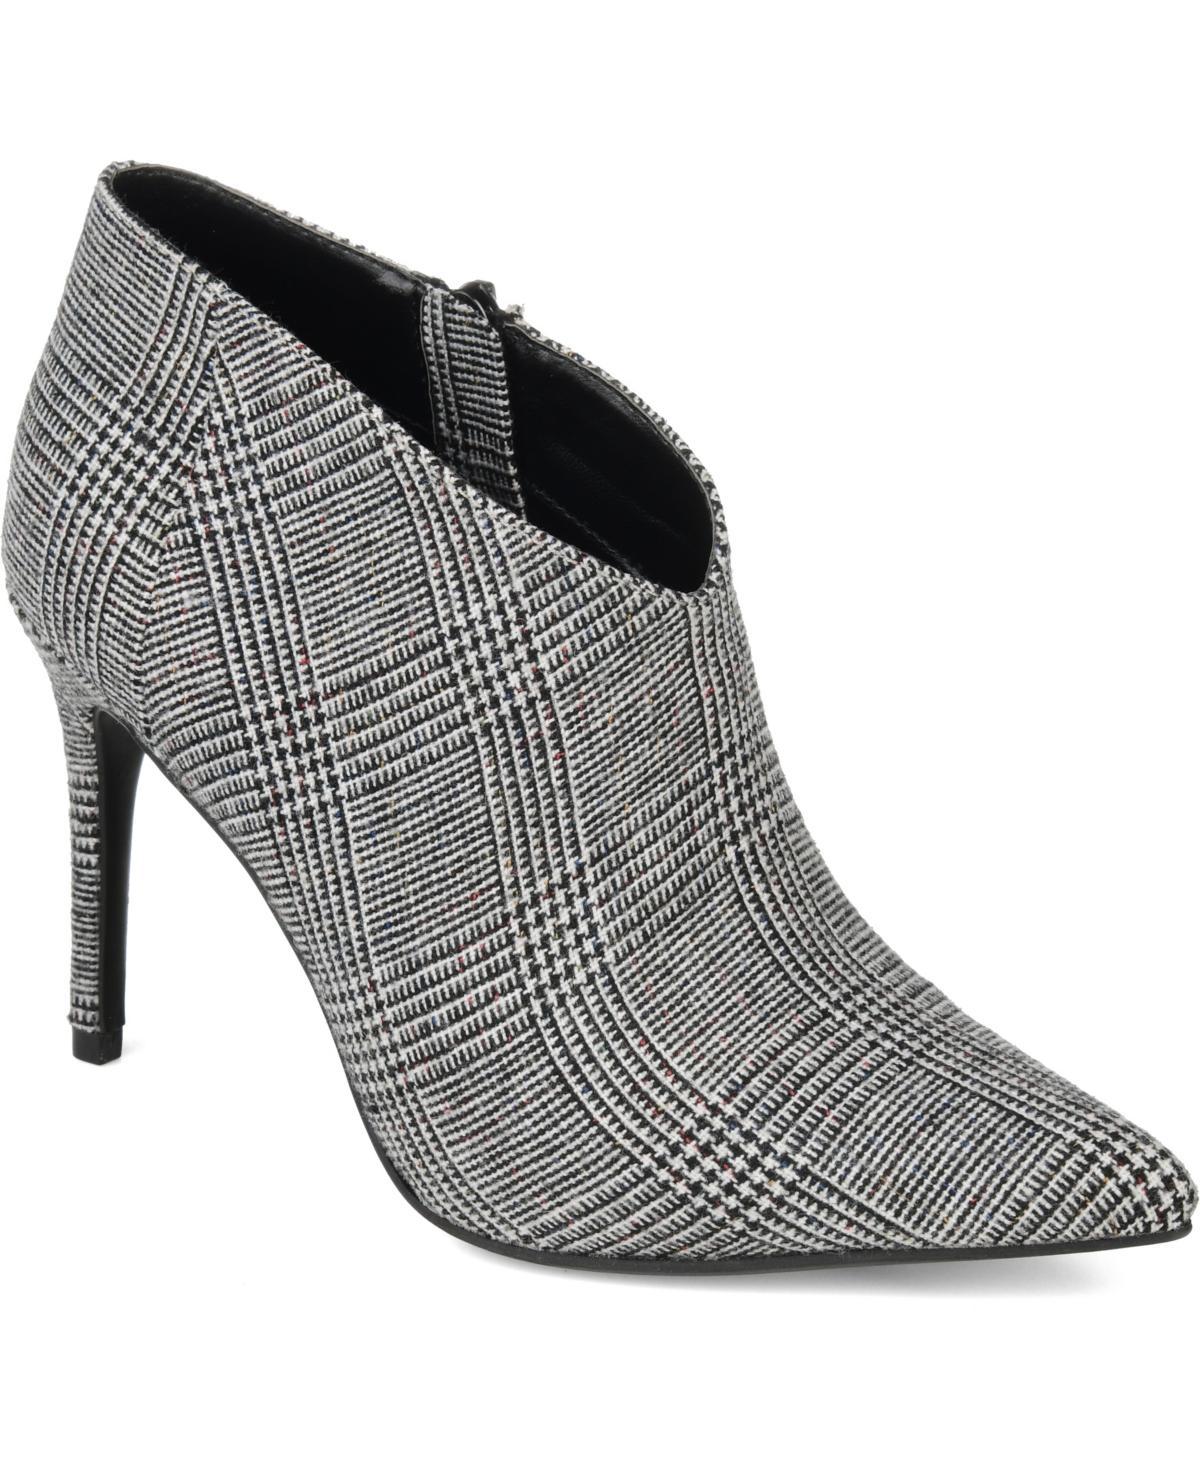 Journee Collection Womens Demmi Bootie Womens Shoes Product Image